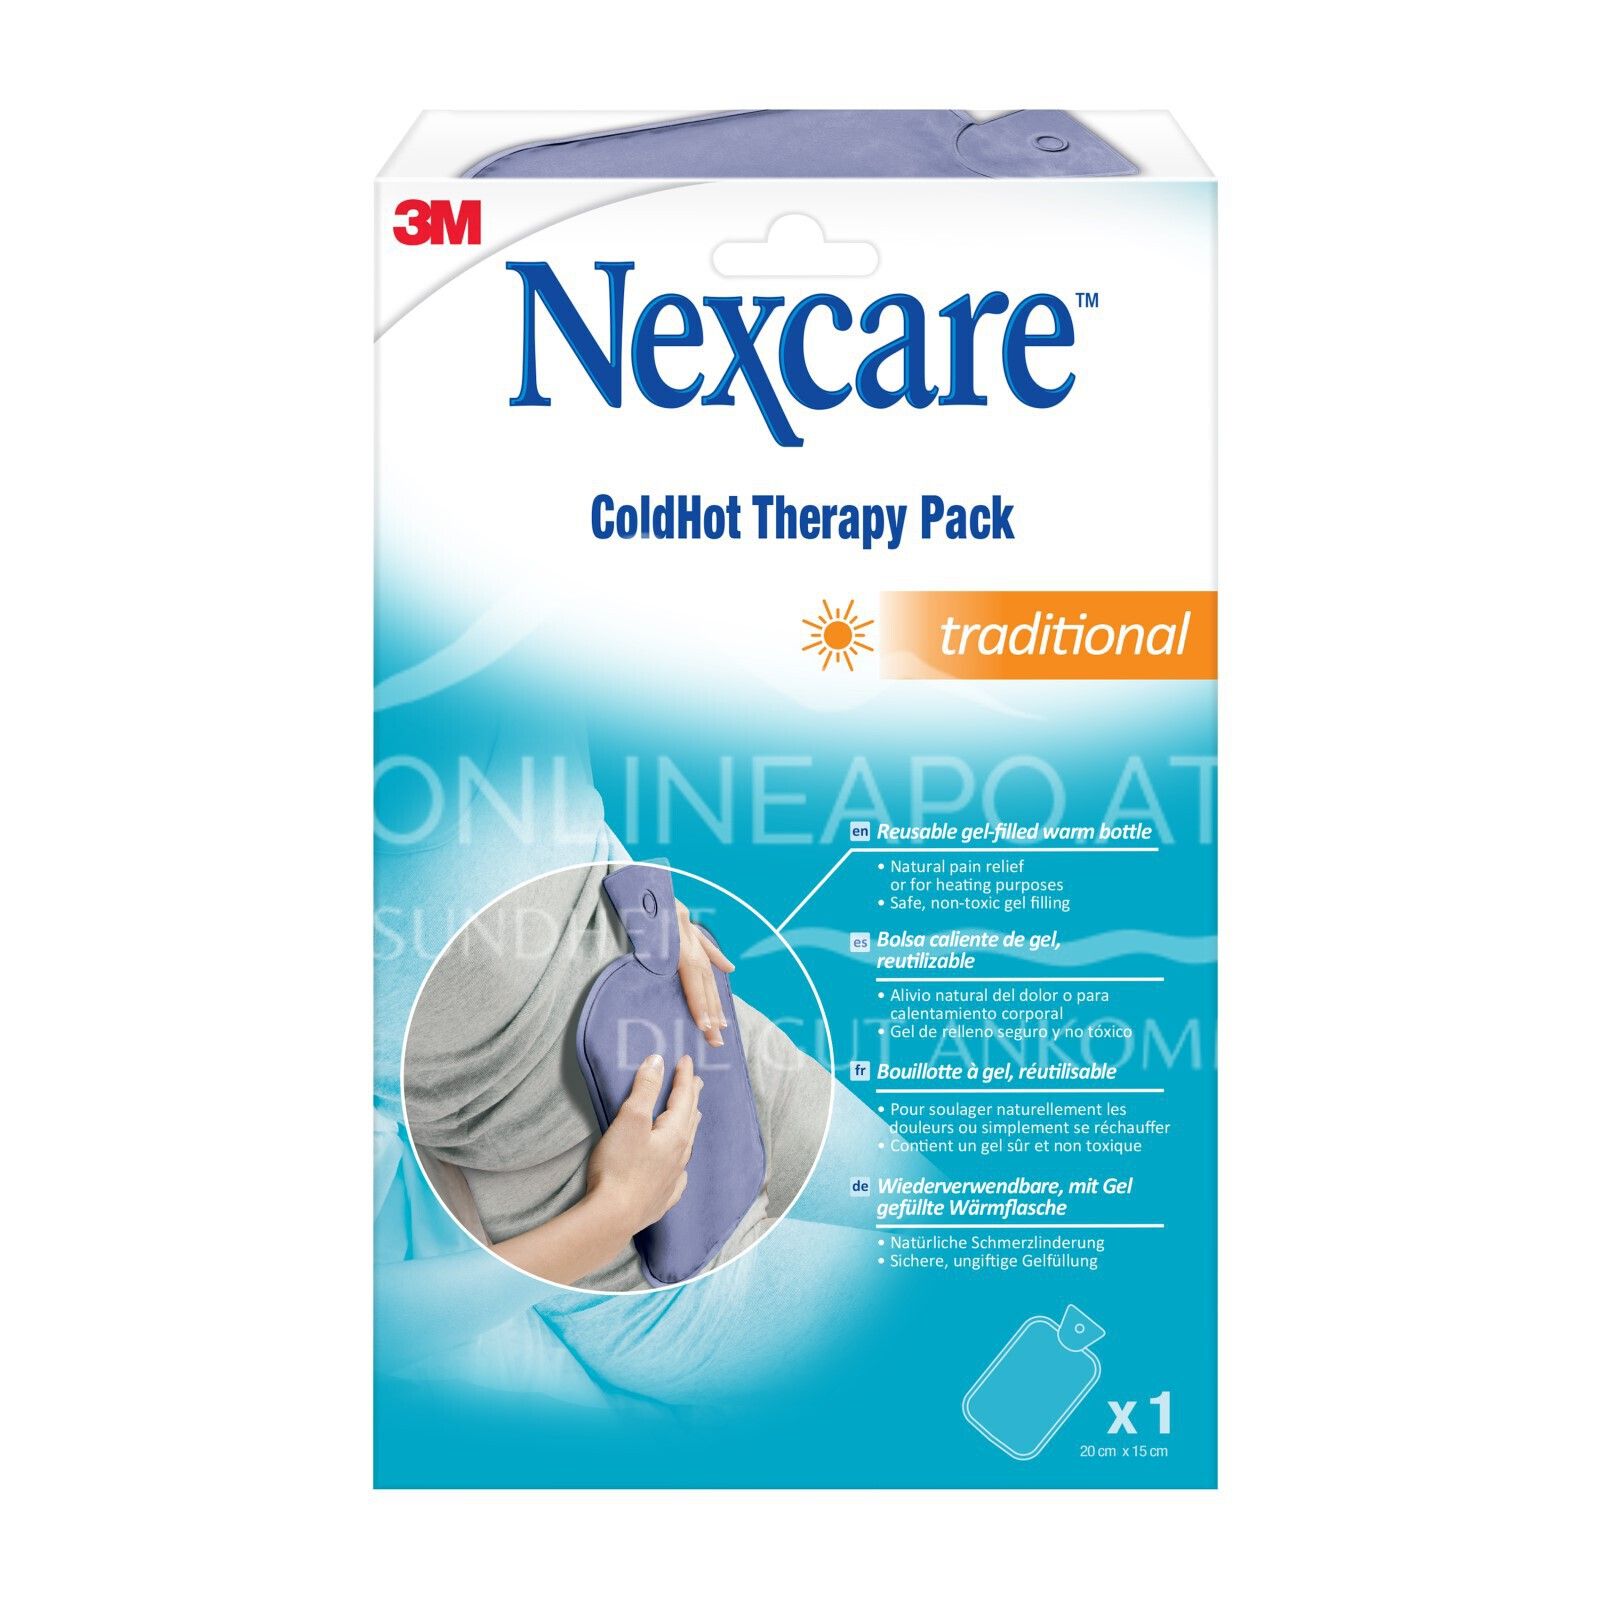 3M Nexcare™ ColdHot Therapy Pack Traditional